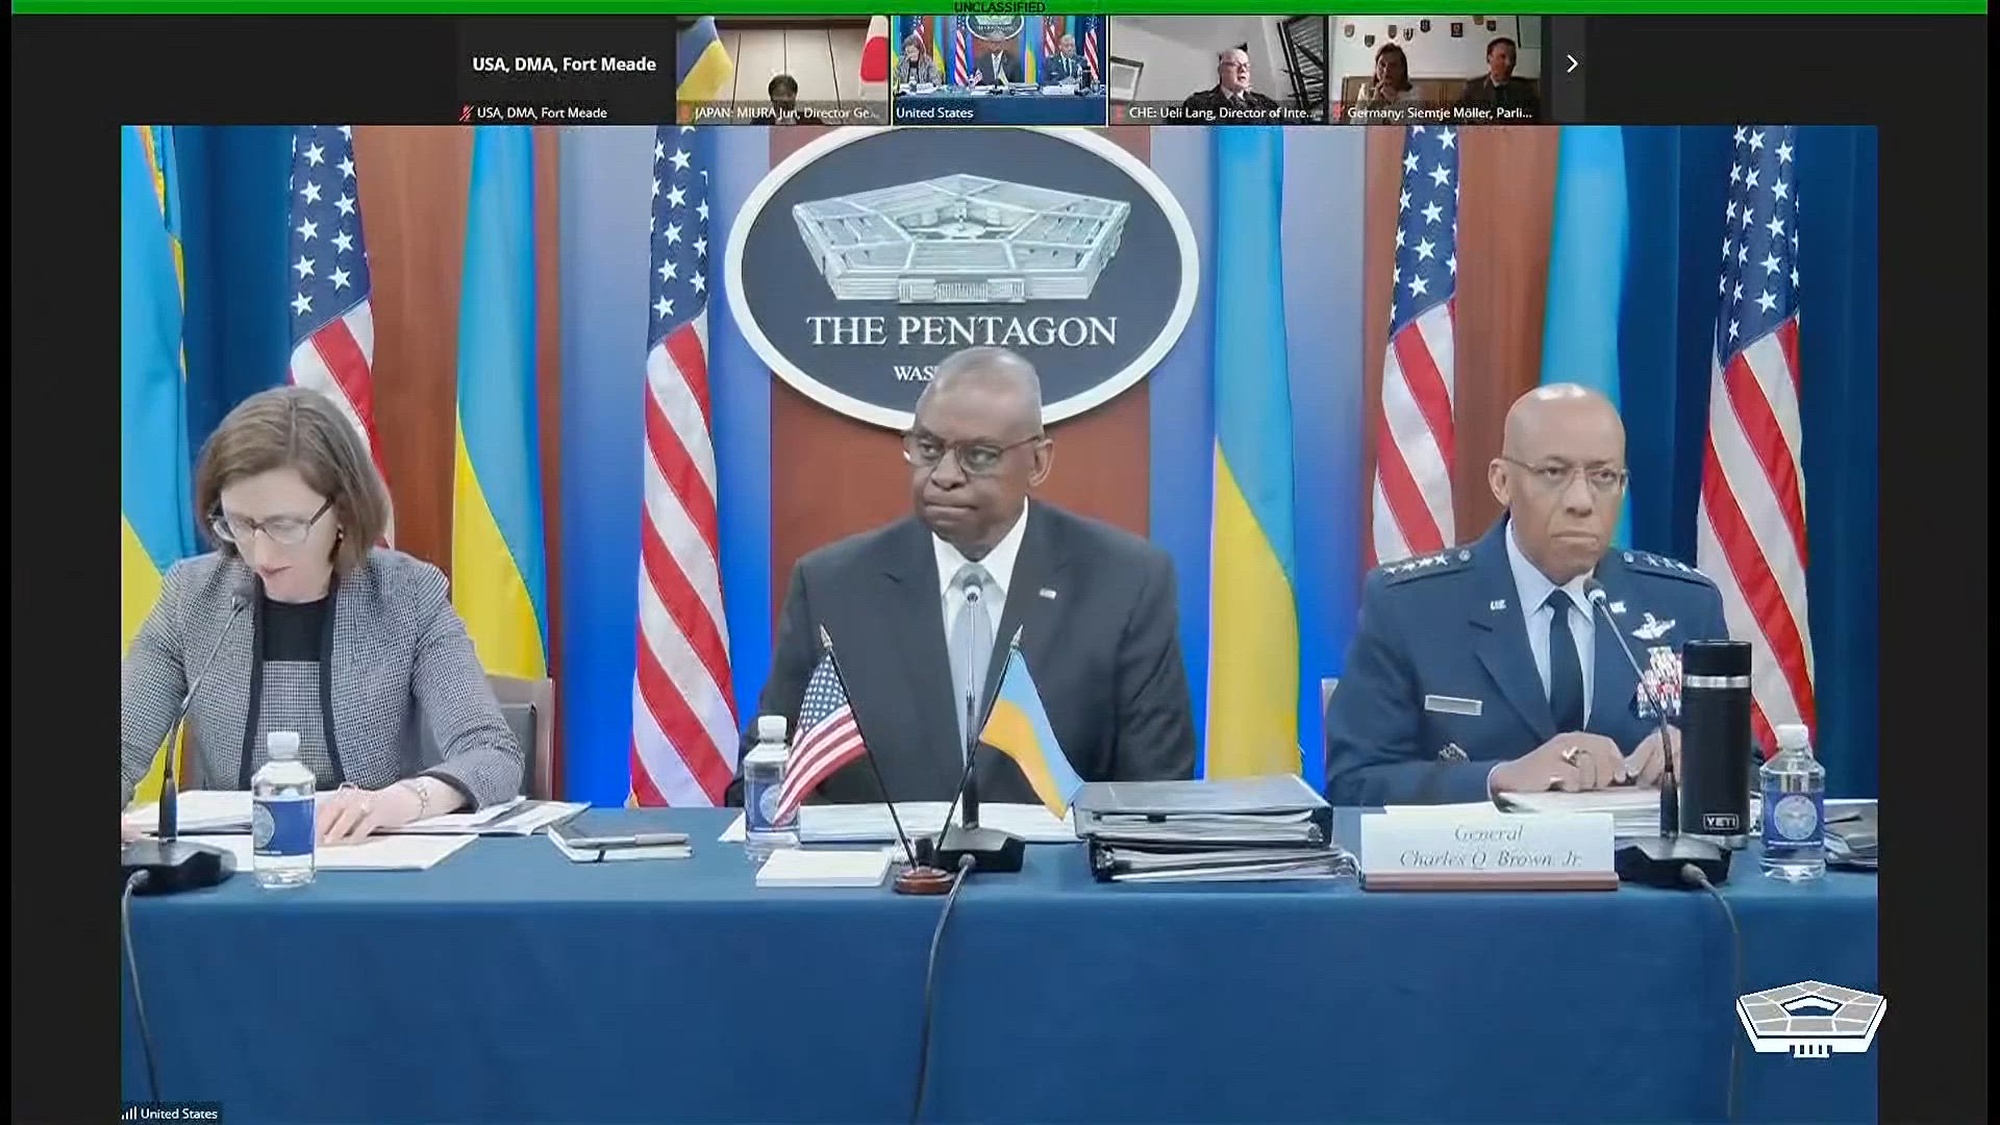 Secretary of Defense Lloyd J. Austin III delivers opening remarks at a virtual meeting of the Ukraine Defense Contact Group. Ministers of defense and senior military officials from nearly 50 nations discuss the ongoing crisis in Ukraine.